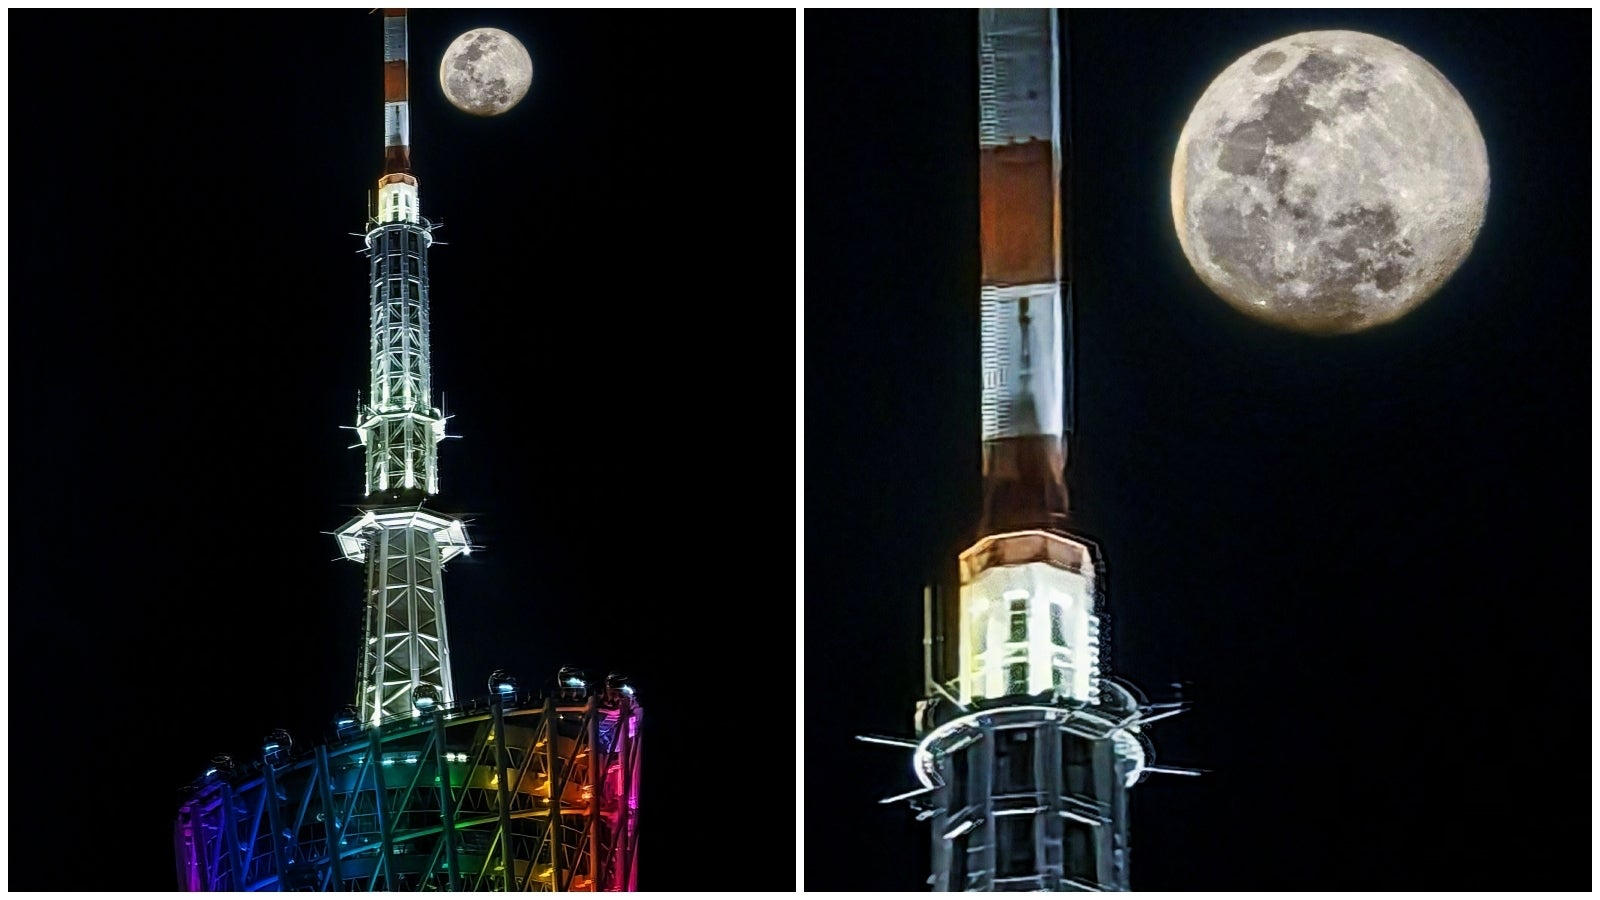 The Huawei P60 Pro might reclaim the company's crown as the best Moon Shot-taker. But how fake is fake enough? - Yes, your moon photos are sort of “fake” but nothing to apologize for (Samsung breaks silence)